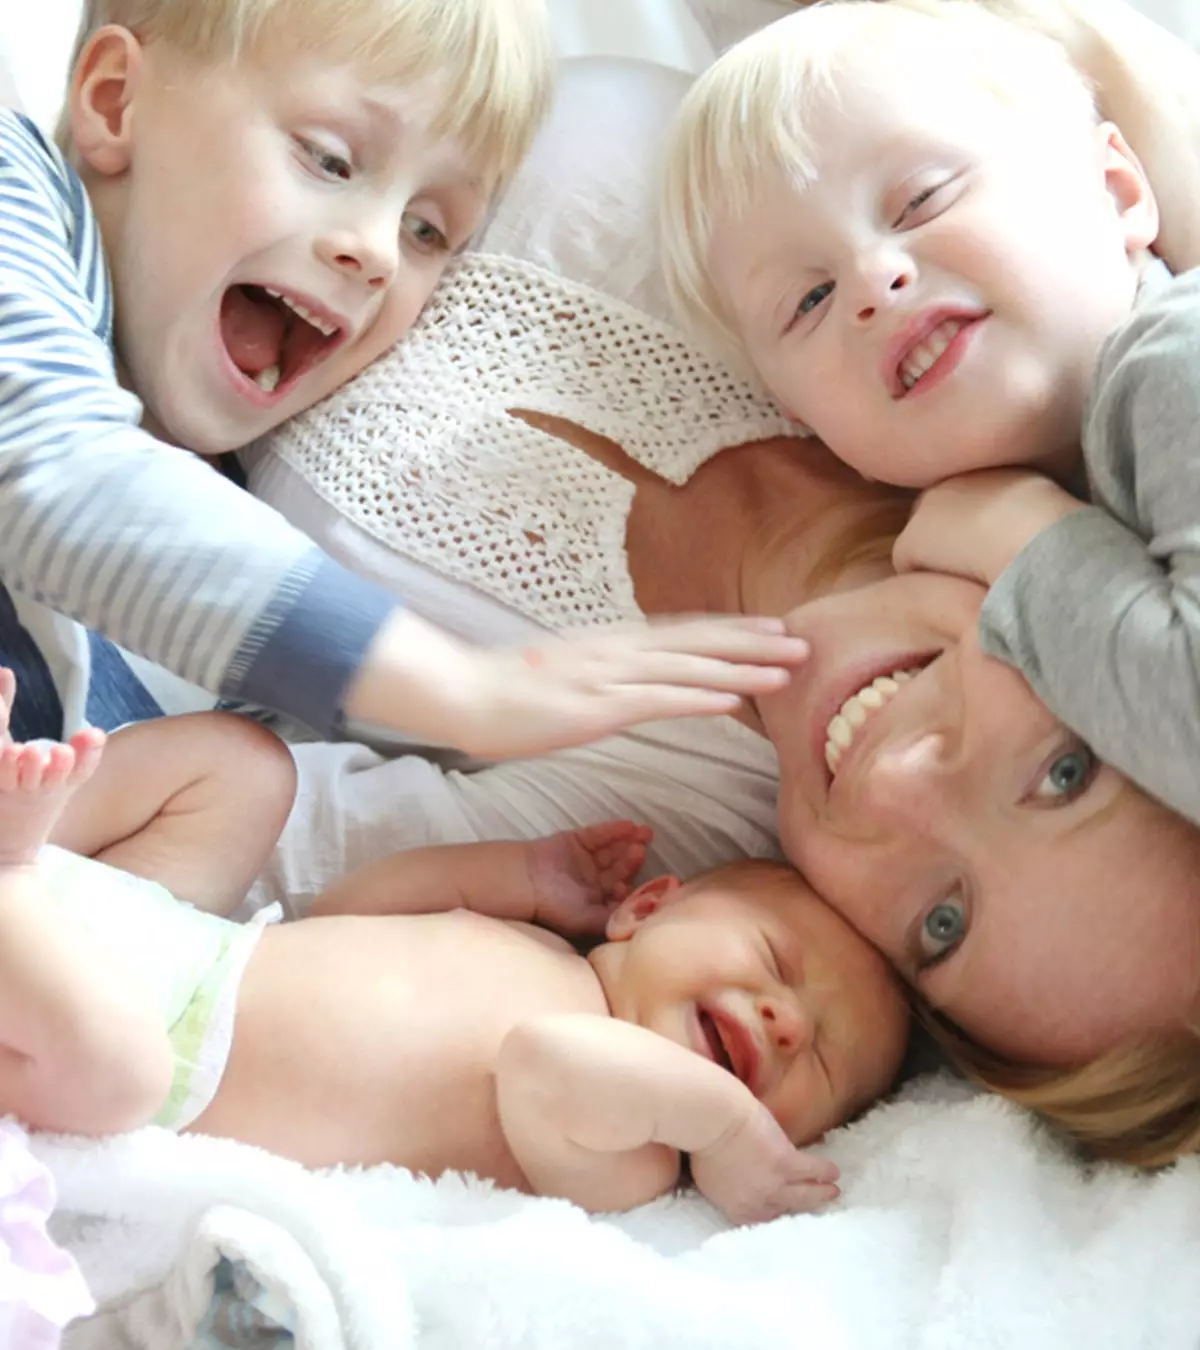 Real Moms Share: Kids Meeting Their Sibling For The First Time